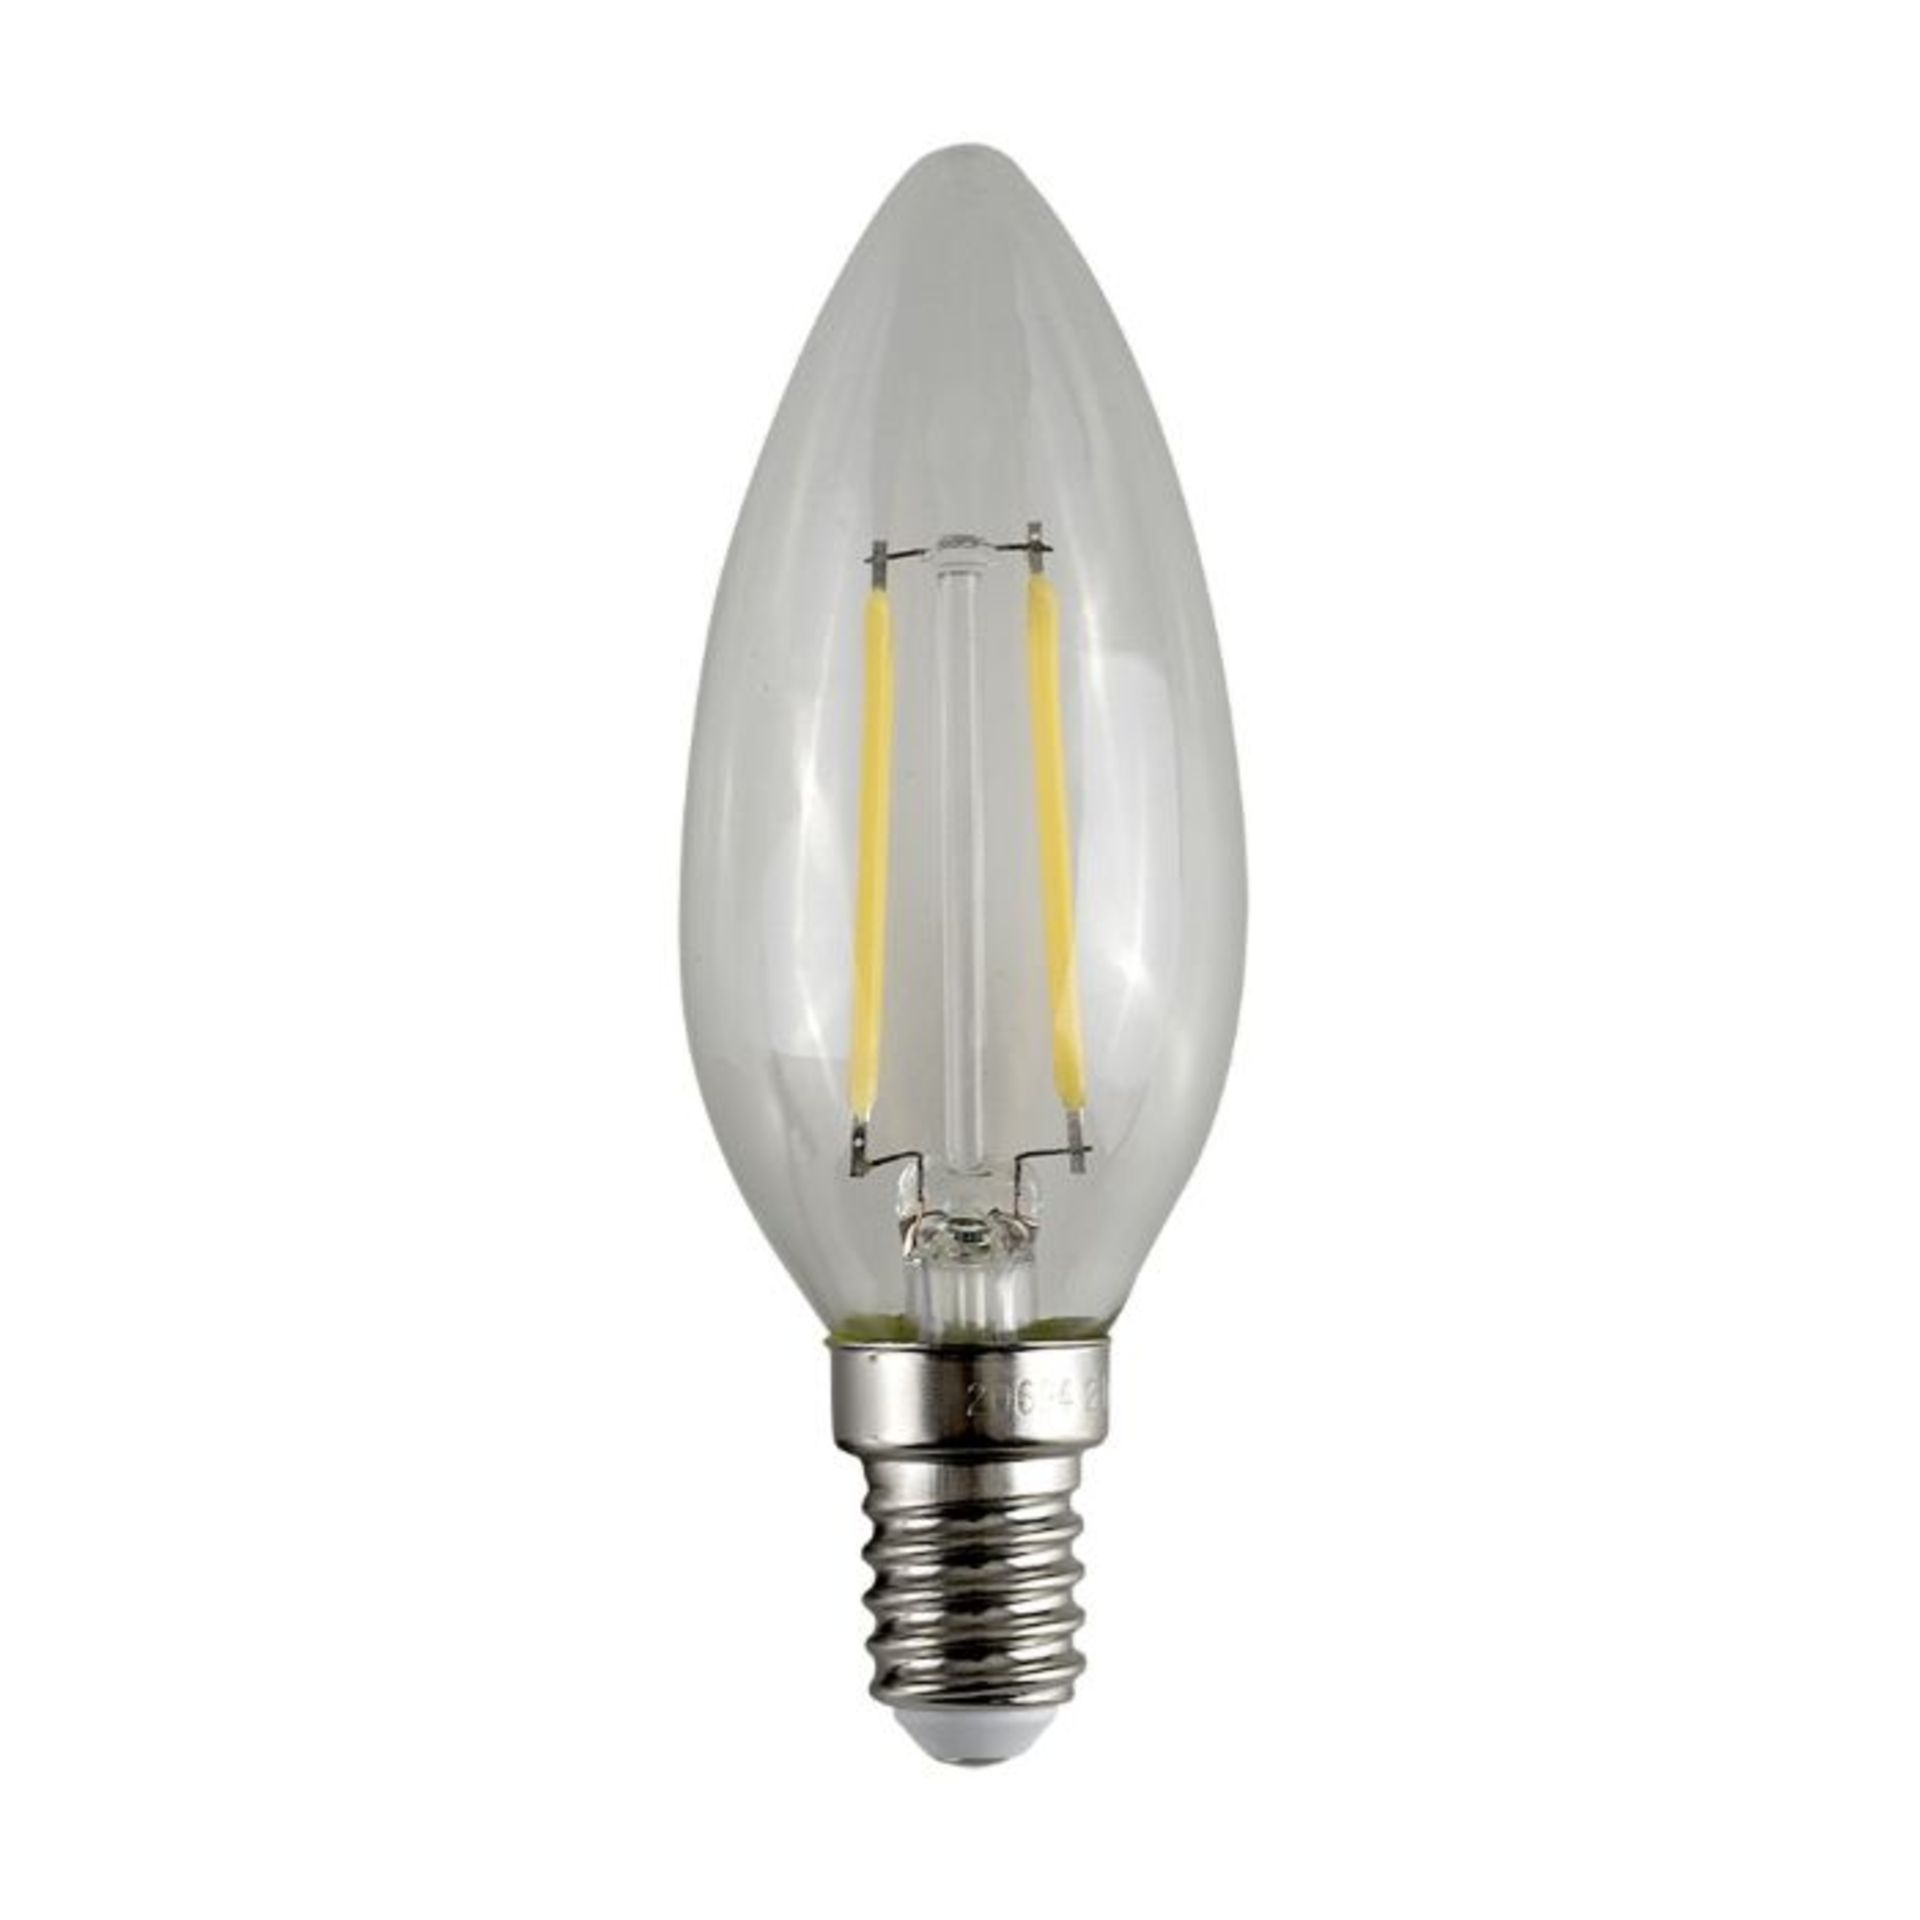 Symple Stuff,4W E14 Dimmable LED Vintage Light Bulb(SCREW END) RRP -£7.23 (25868/28 -UEL10296) - Image 2 of 2